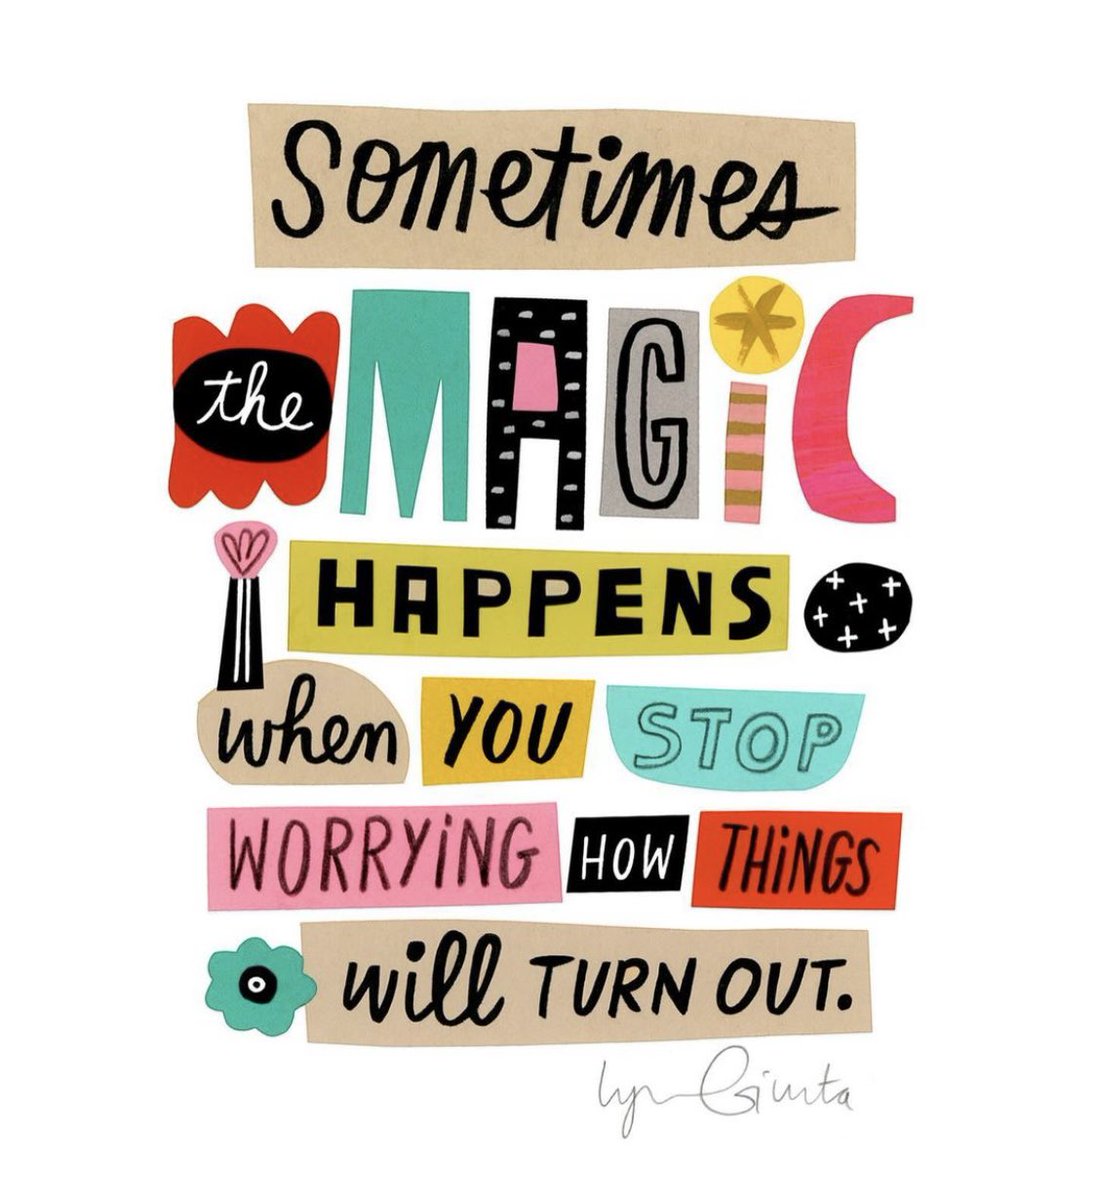 Sometimes the magic happens when you stop worrying how things will turn out Image: instagram.com/lynn_giunta